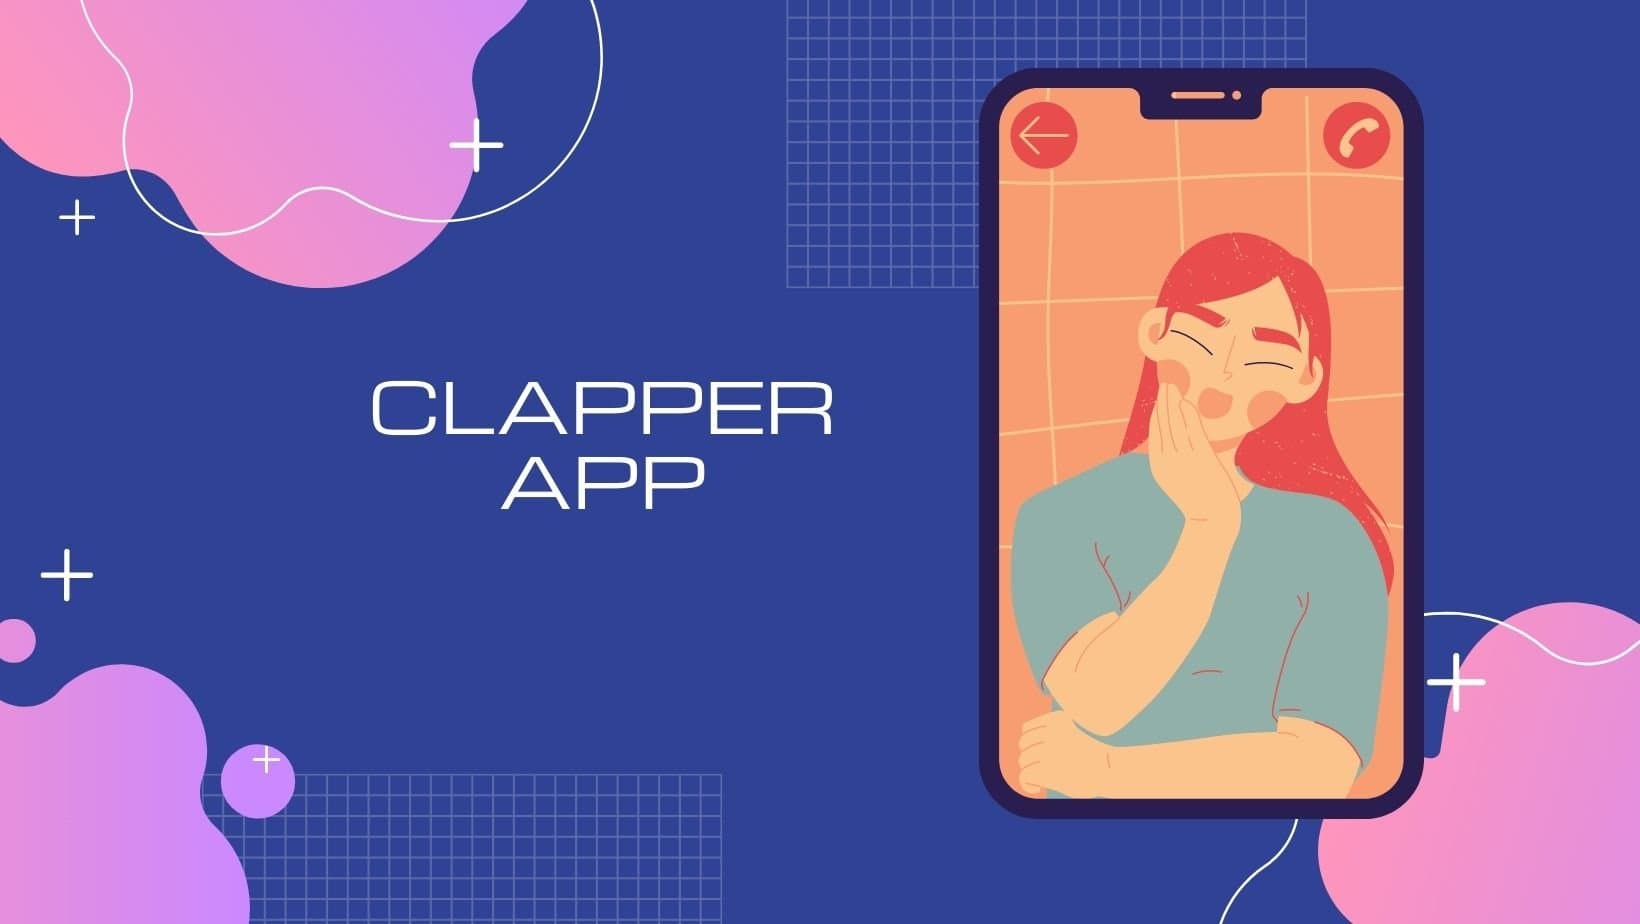 Clapper App for Android and iPhone